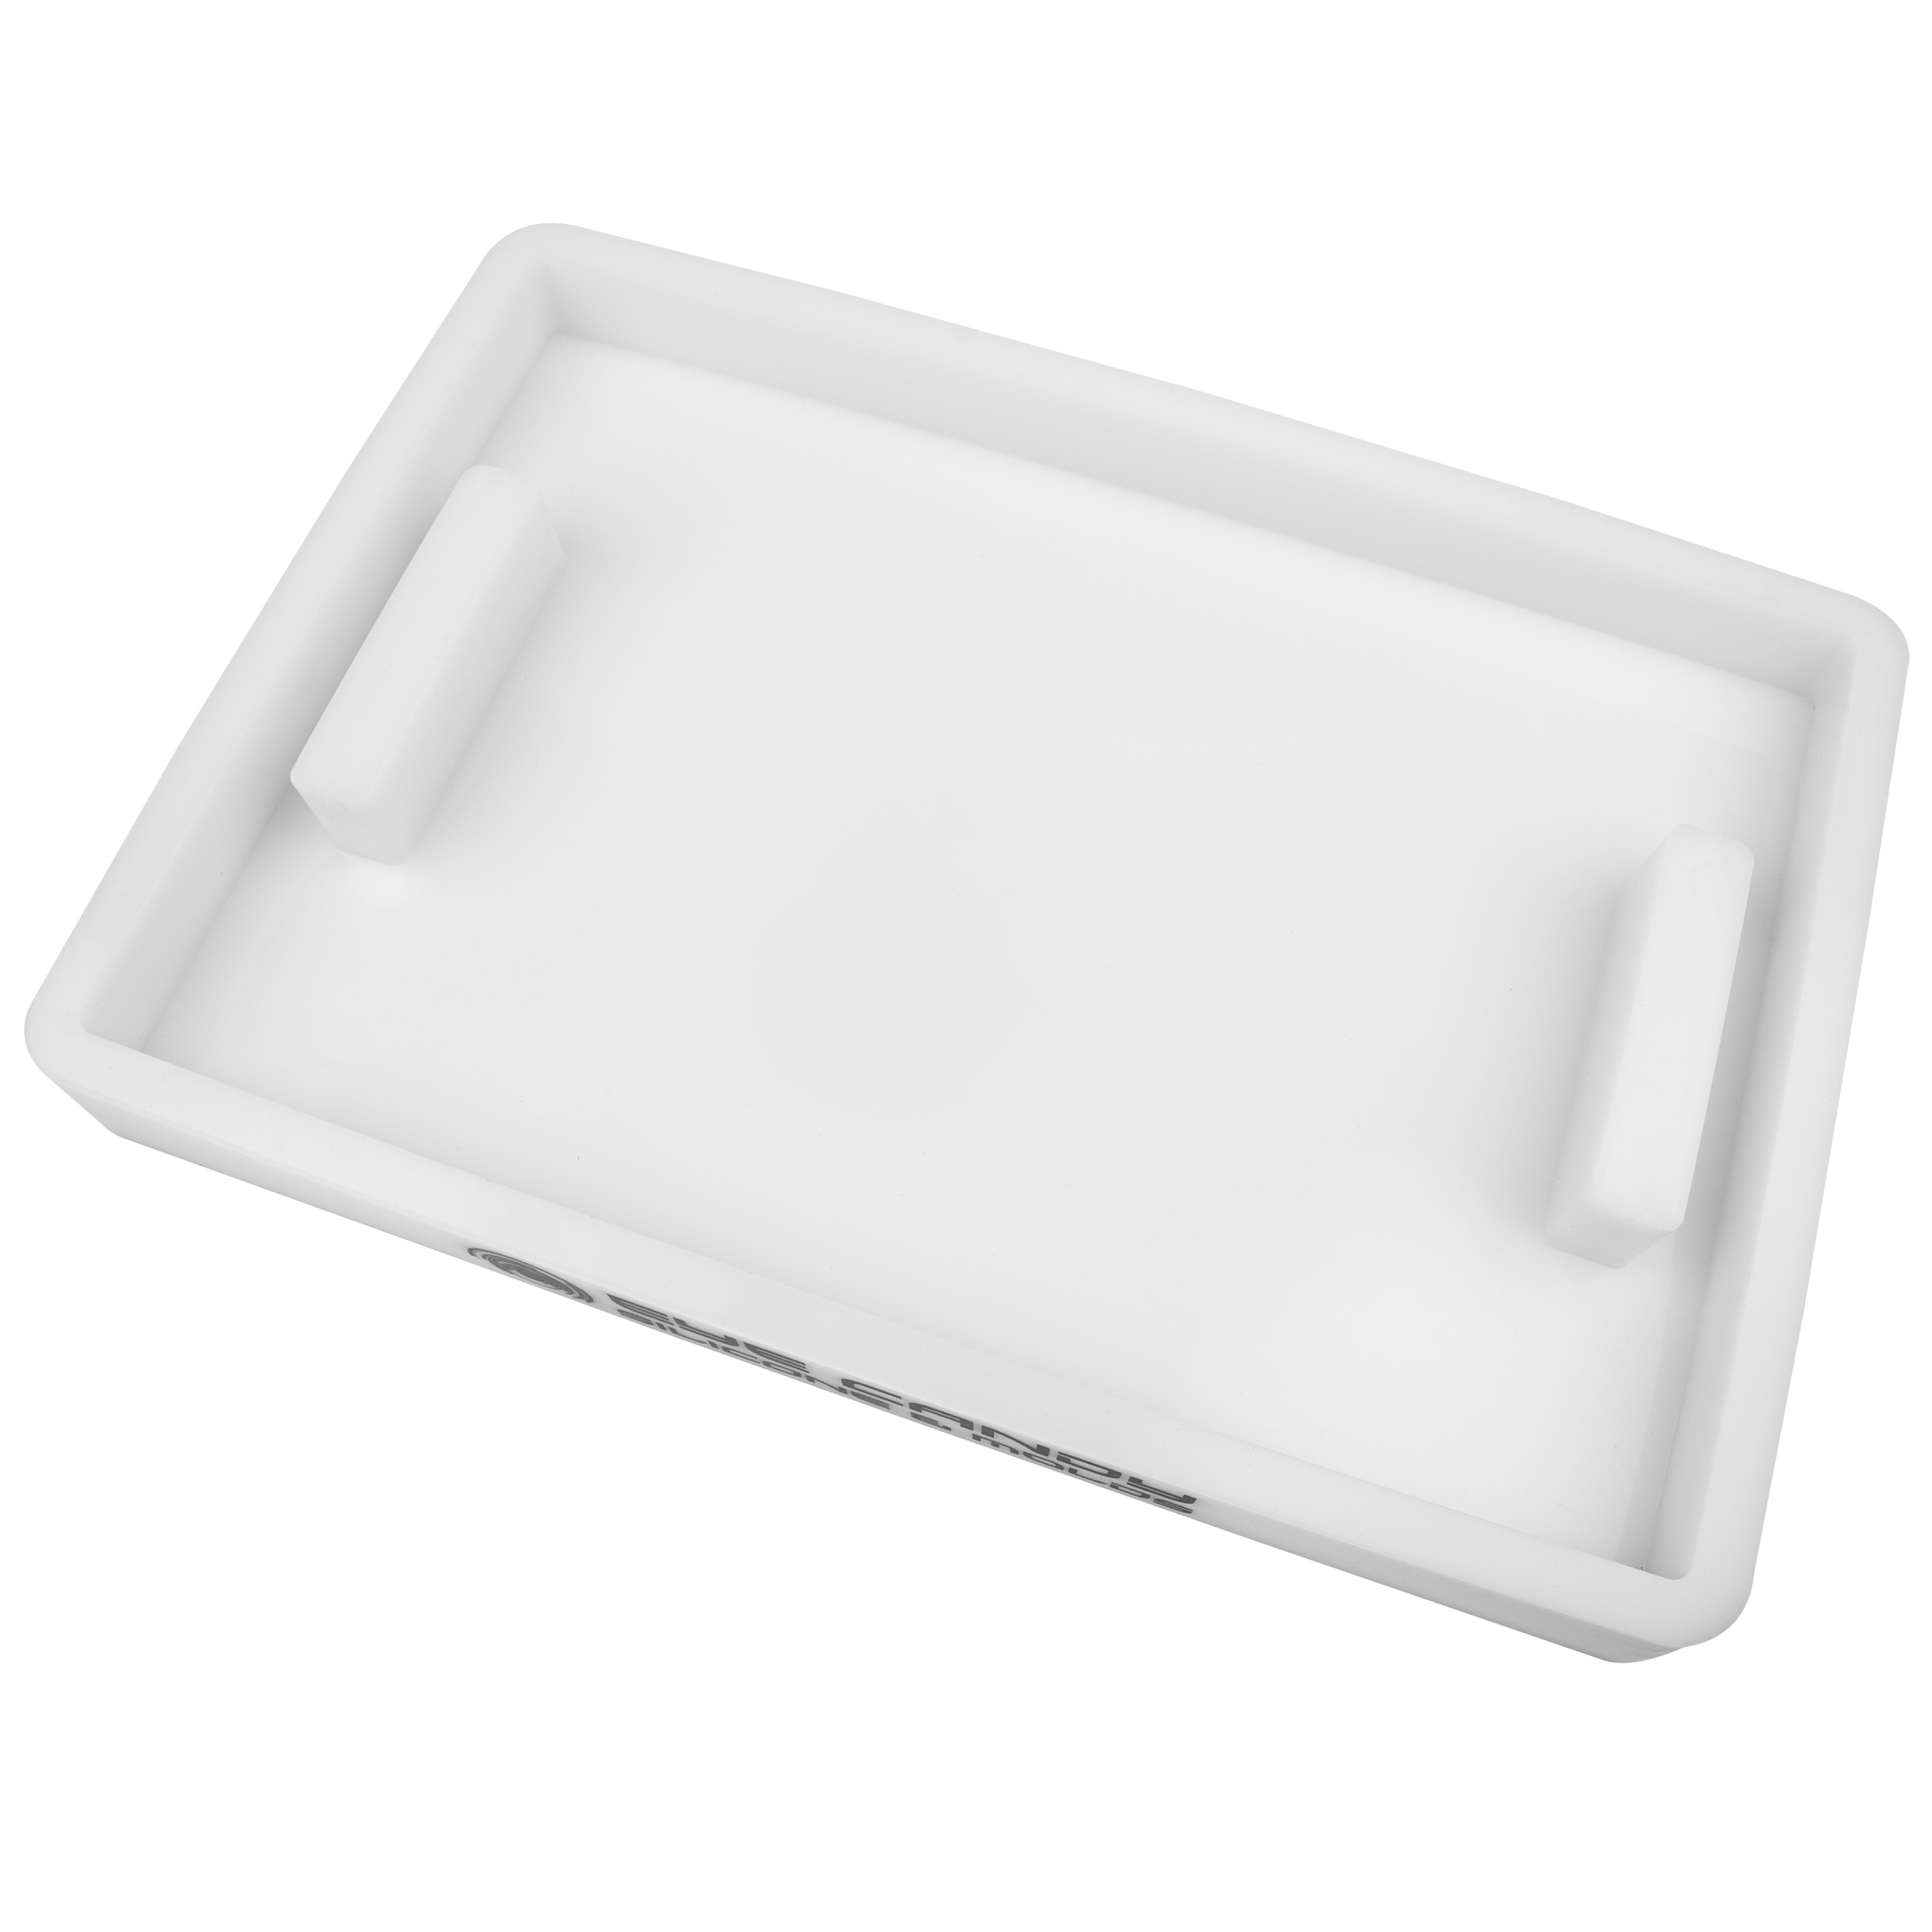 18 x 12 x 1 Rectangle Silicone Mold with Handles (Eye Candy Molds)